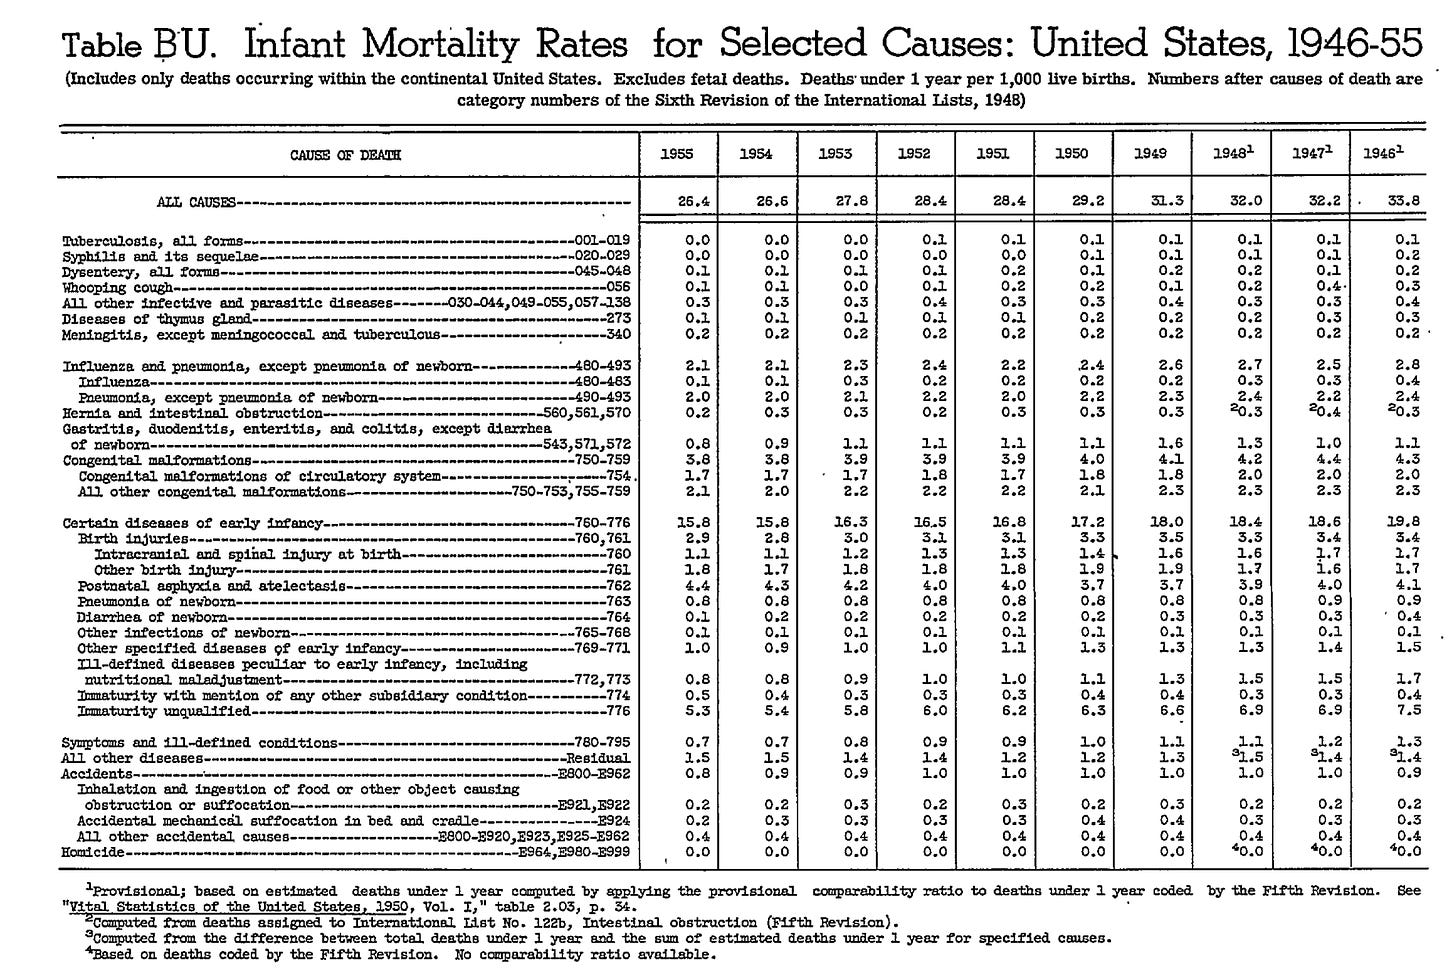 Mislabeling Vaccination Deaths for 50 Years Https%3A%2F%2Fsubstack-post-media.s3.amazonaws.com%2Fpublic%2Fimages%2F400975bb-d531-49b3-8571-c8a014f29a95_1858x1246